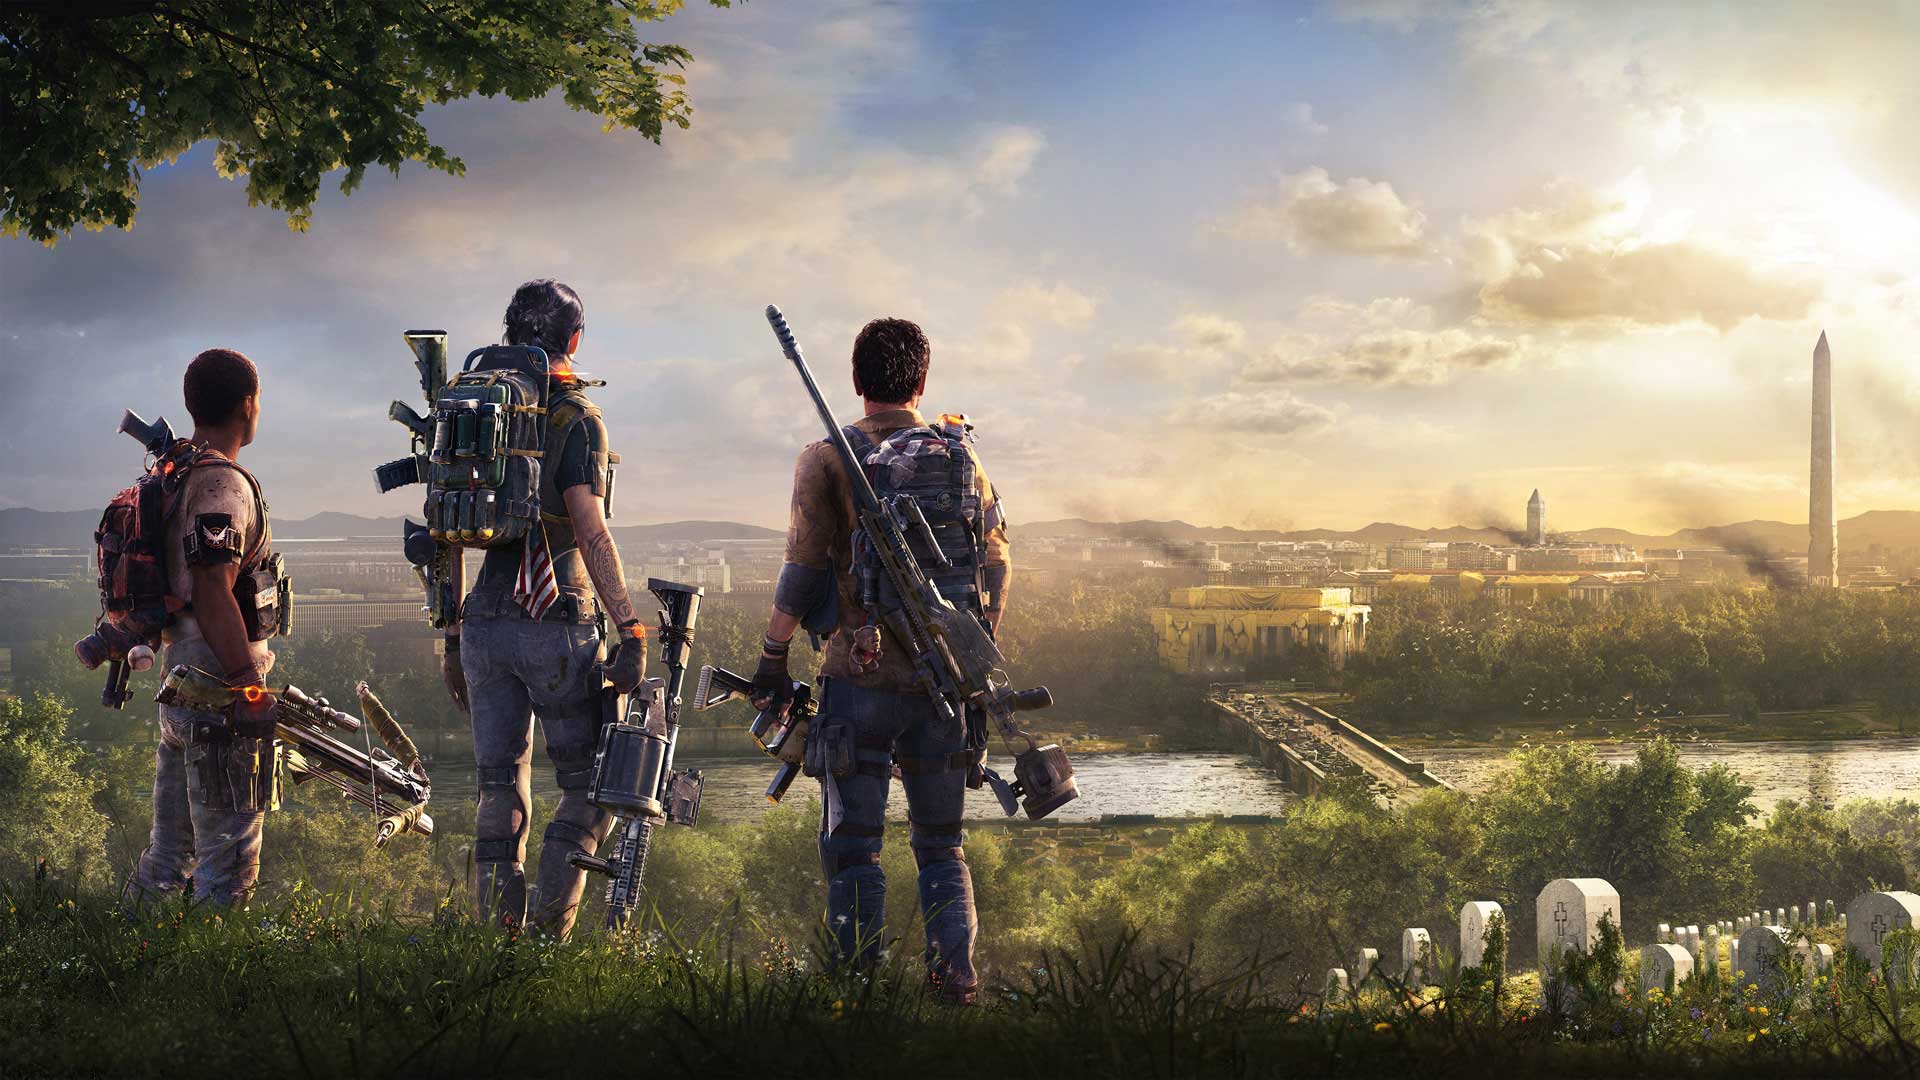 Xbox Game Tom Clancy's The Division 2 - Reviews